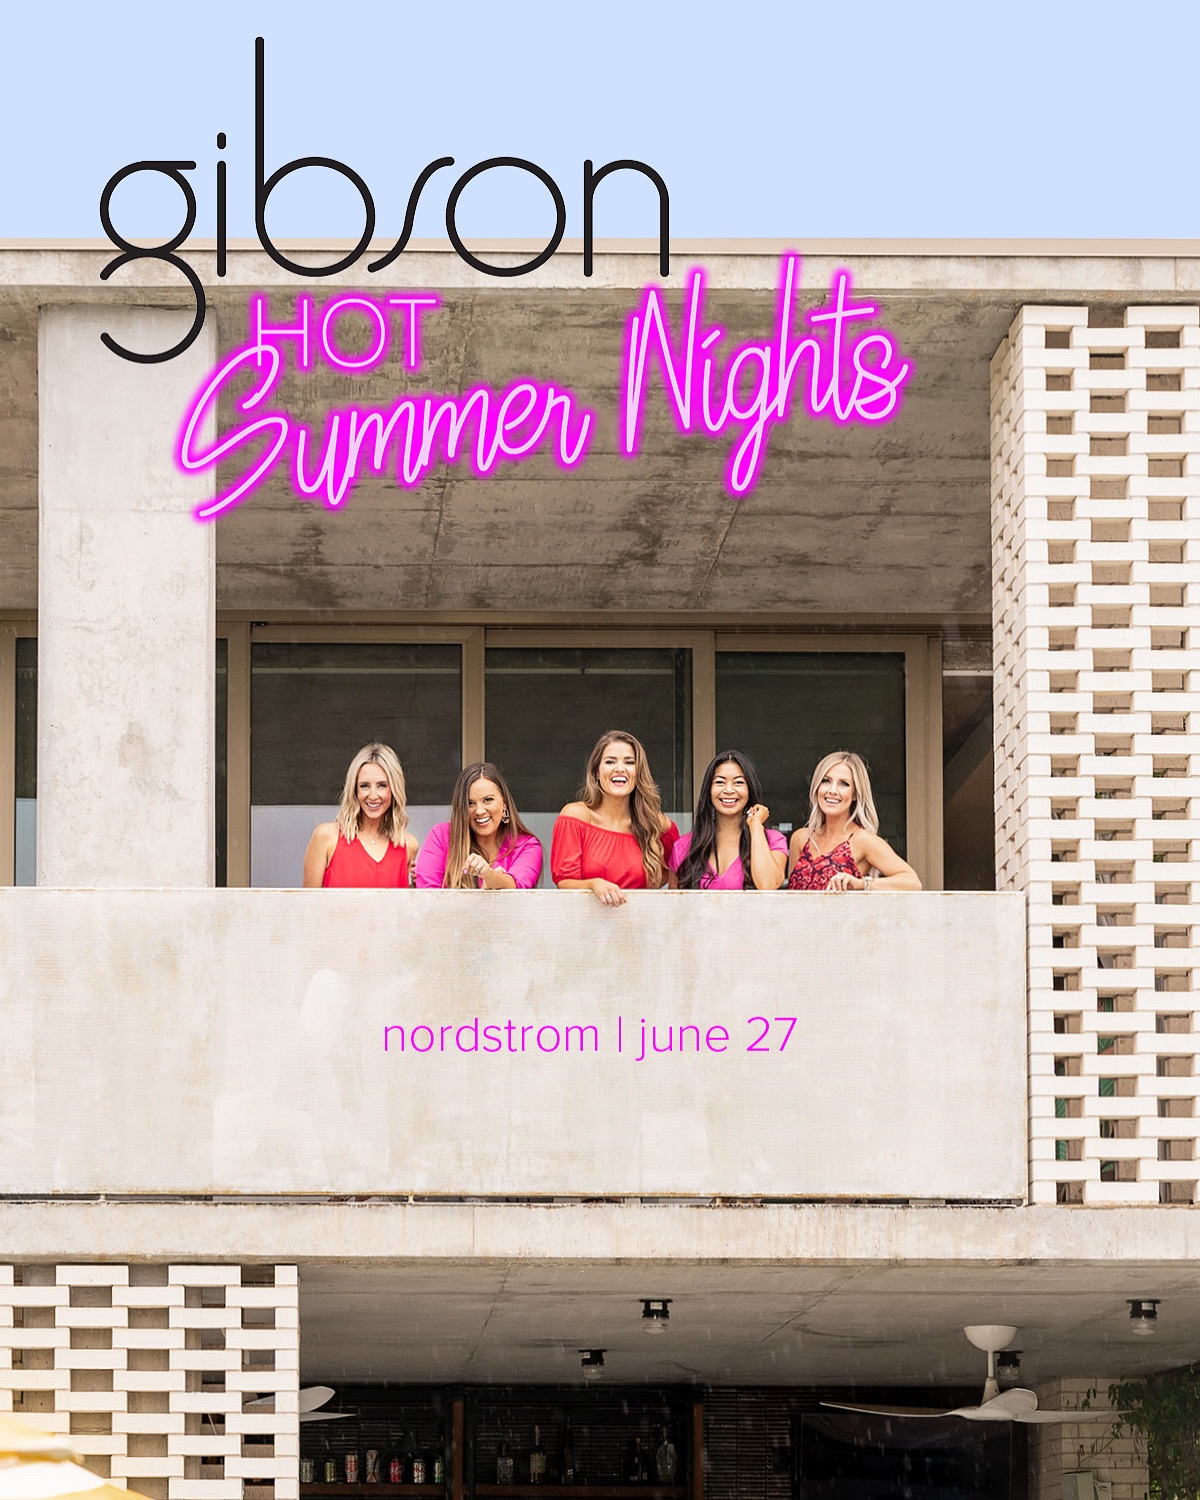 Fashion bloggers, Emily Wieczorek and Ashley Zeal reveal the launch of their first national department store collaboration Hot Summer Nights with Gibson at Nordstrom.